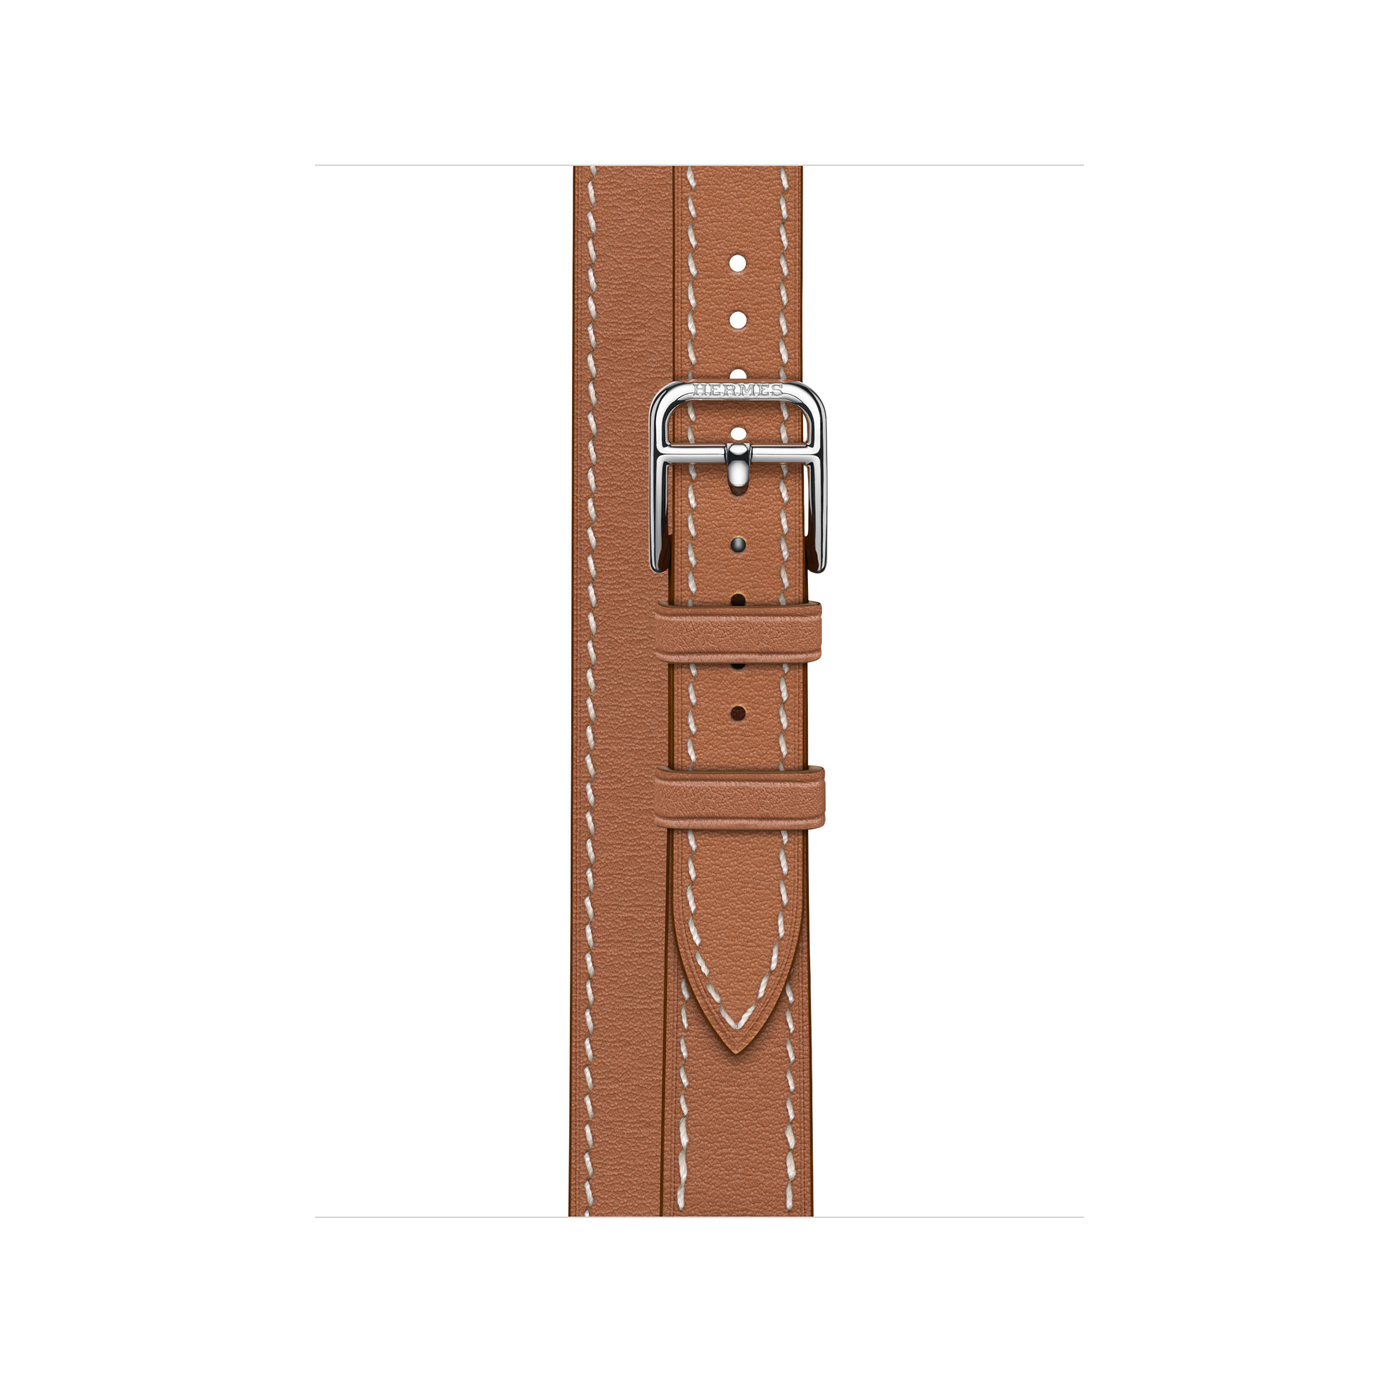 Apple Watch Series 8 Hermès, 41mm Silver Stainless Steel Case with Attelage Double Tour